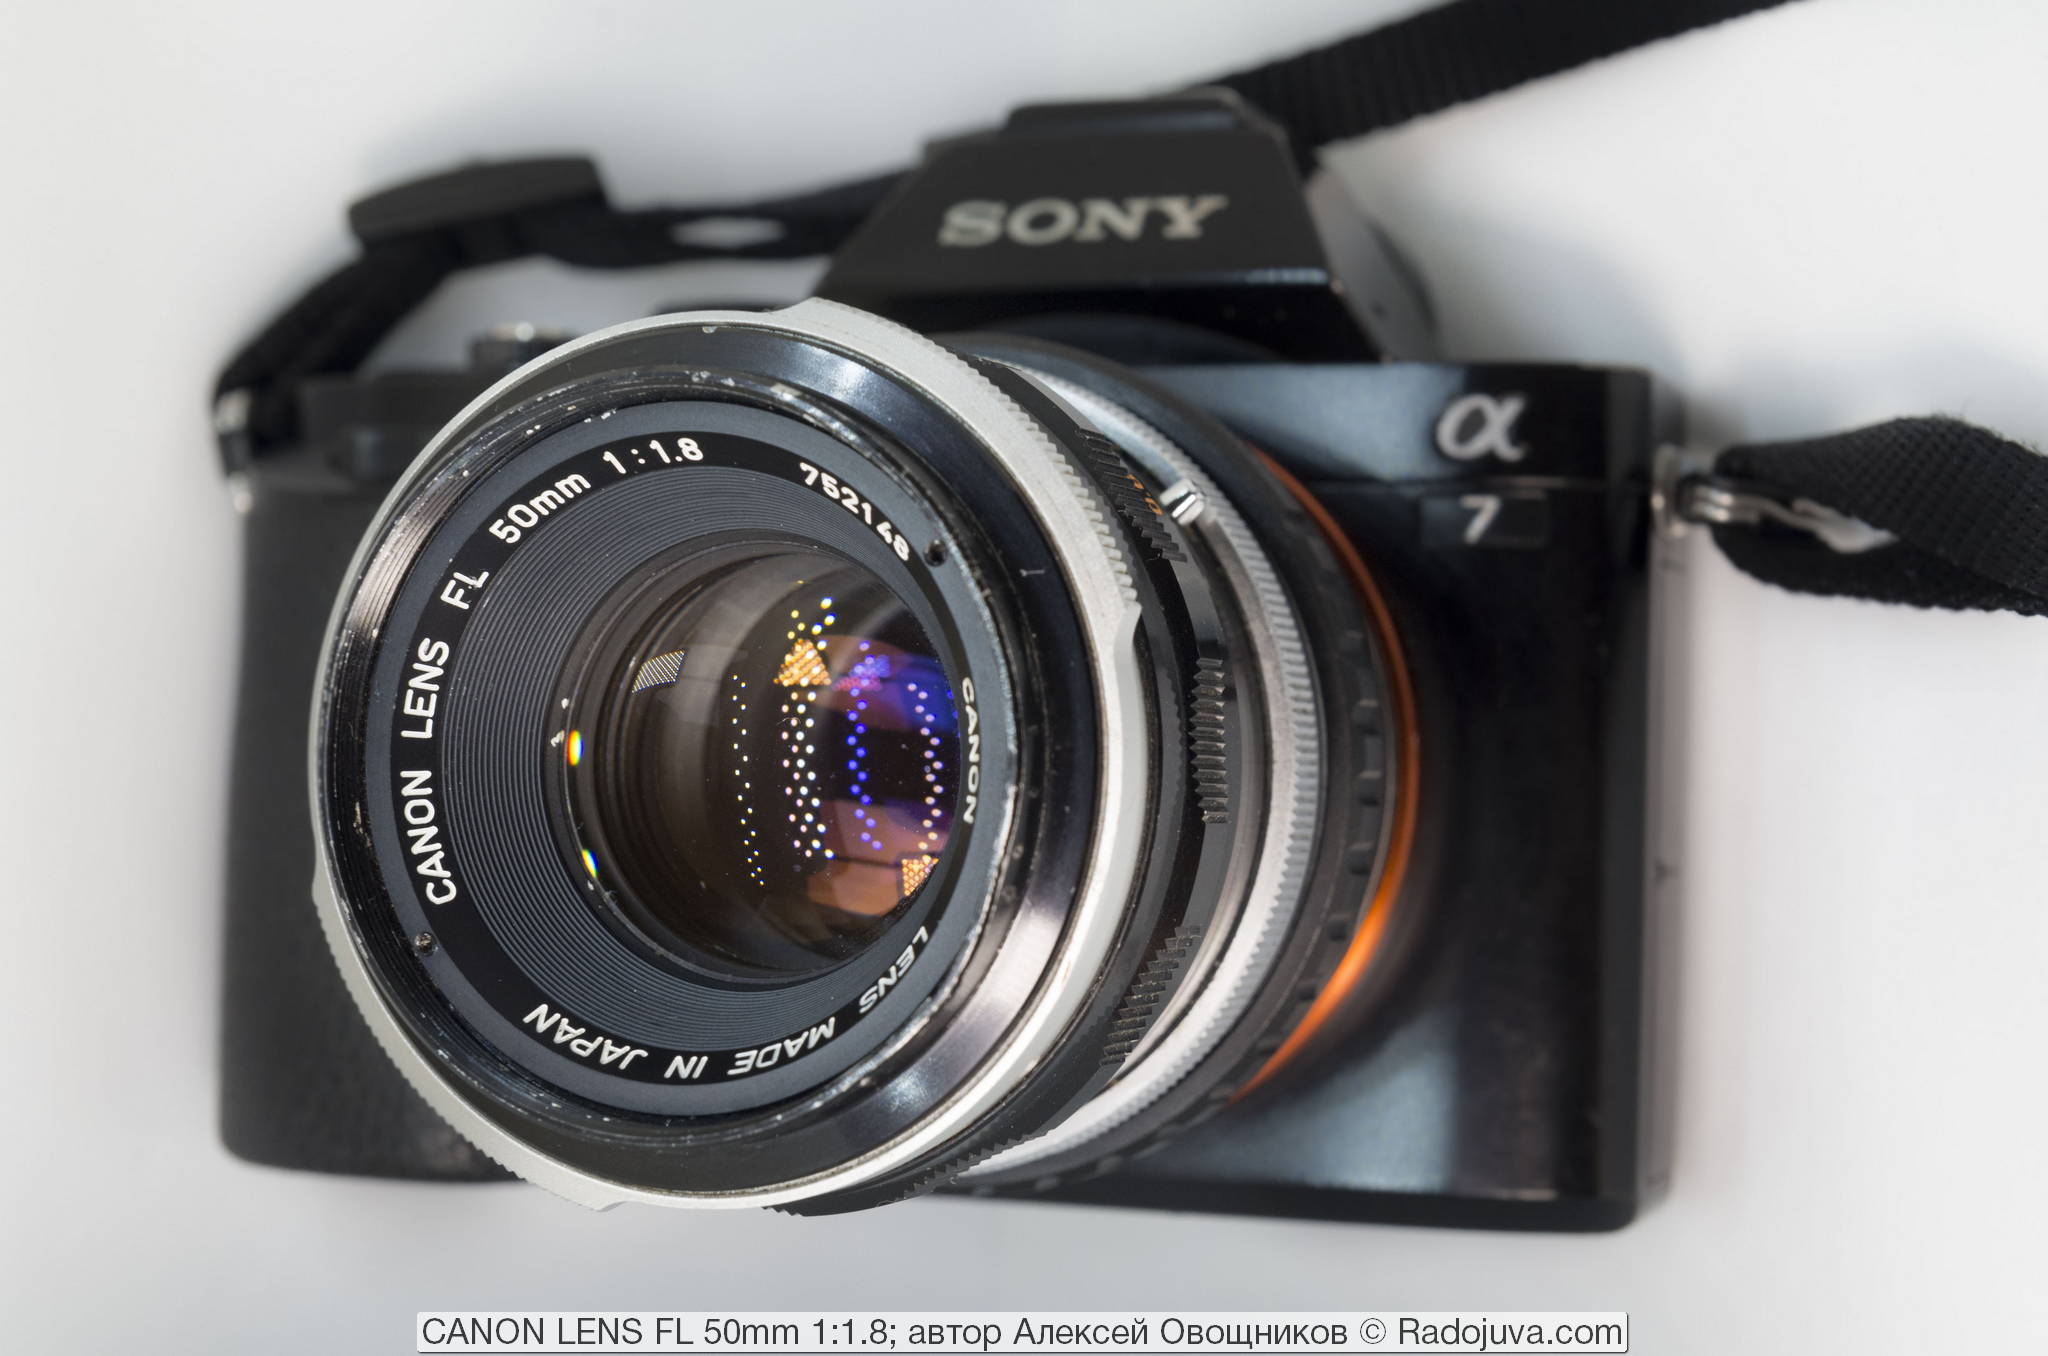 CANON LENS FL 50mm 1: 1.8 II. Review from the reader Radozhiva | Happy